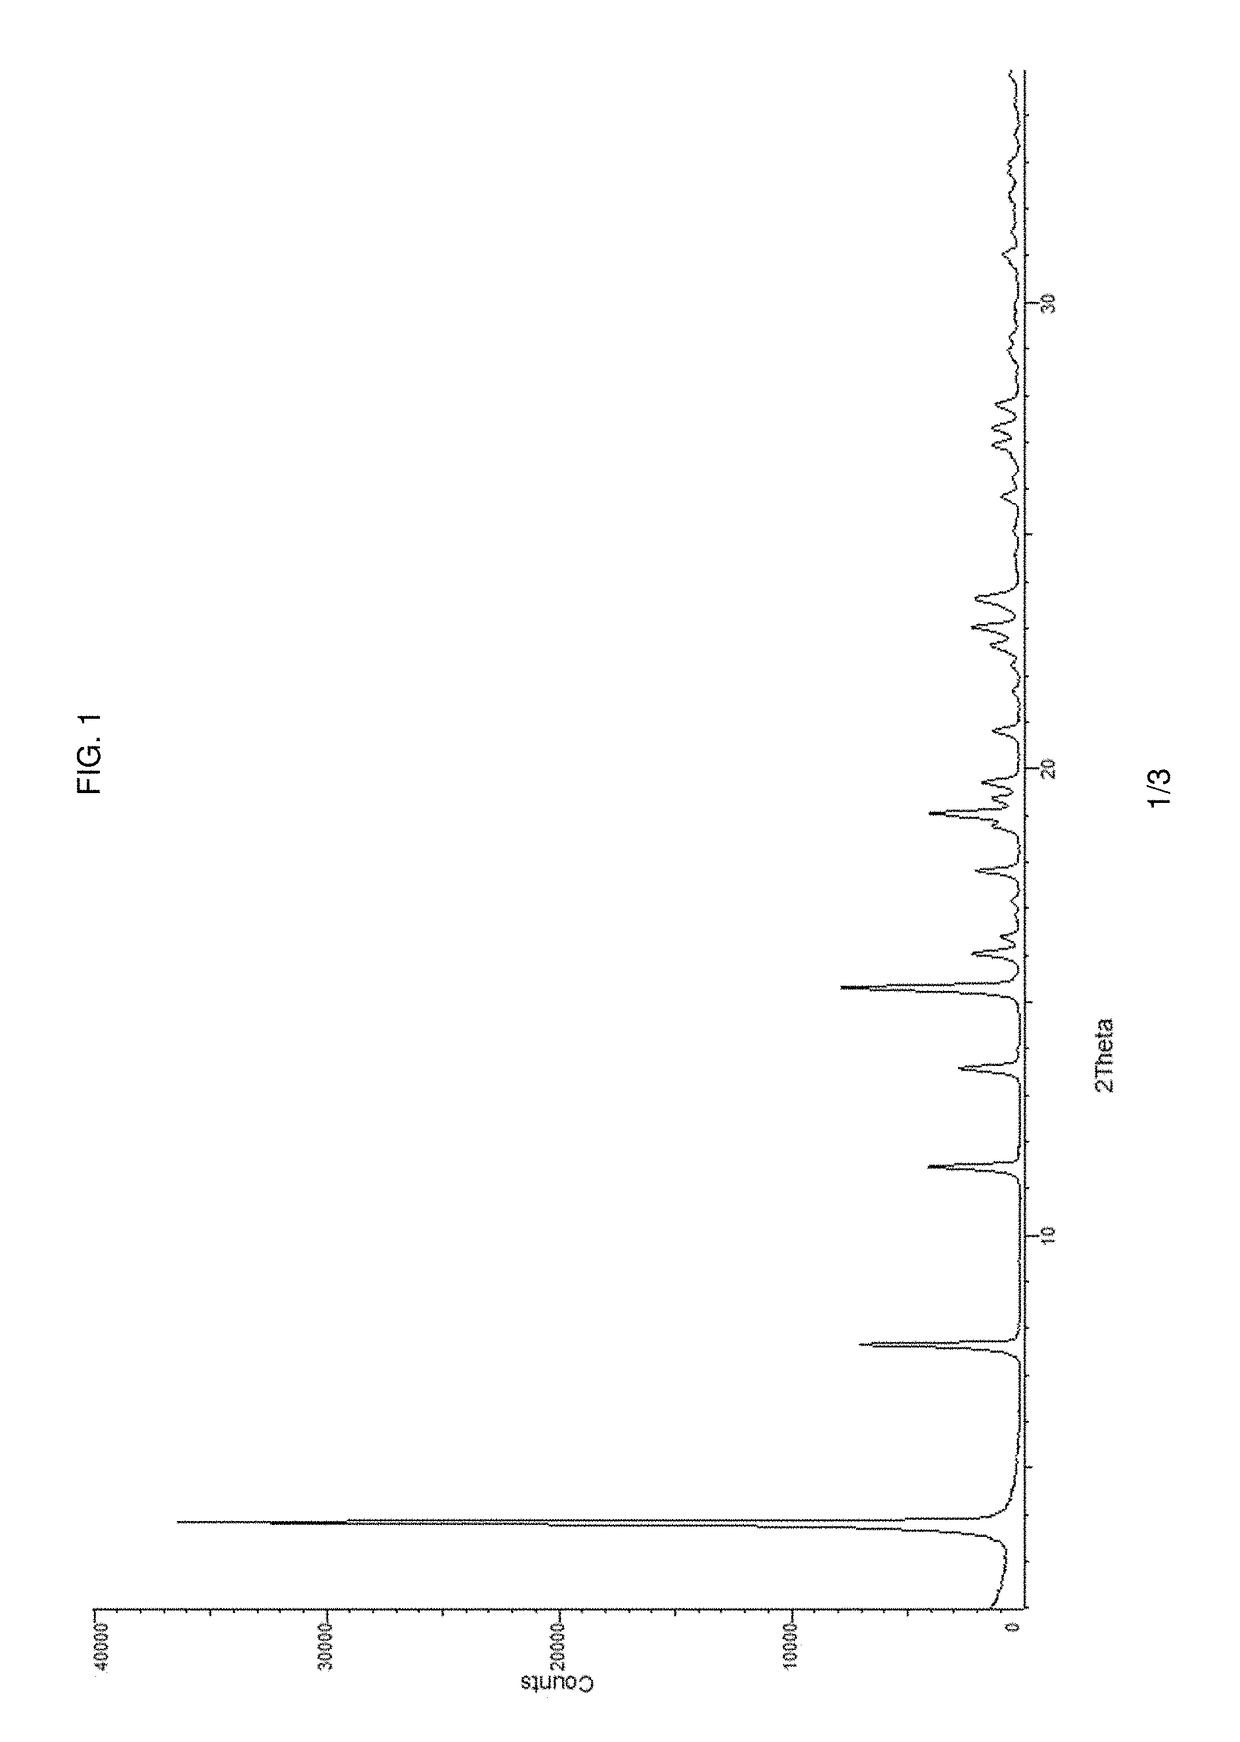 Pharmaceutical composition and pharmaceutical dosage form comprising (E)-4-(2-(aminomethyl)-3-fluoroallyloxy)-N-tert-butylbenzamide, process for their preparation, methods for treating and uses thereof